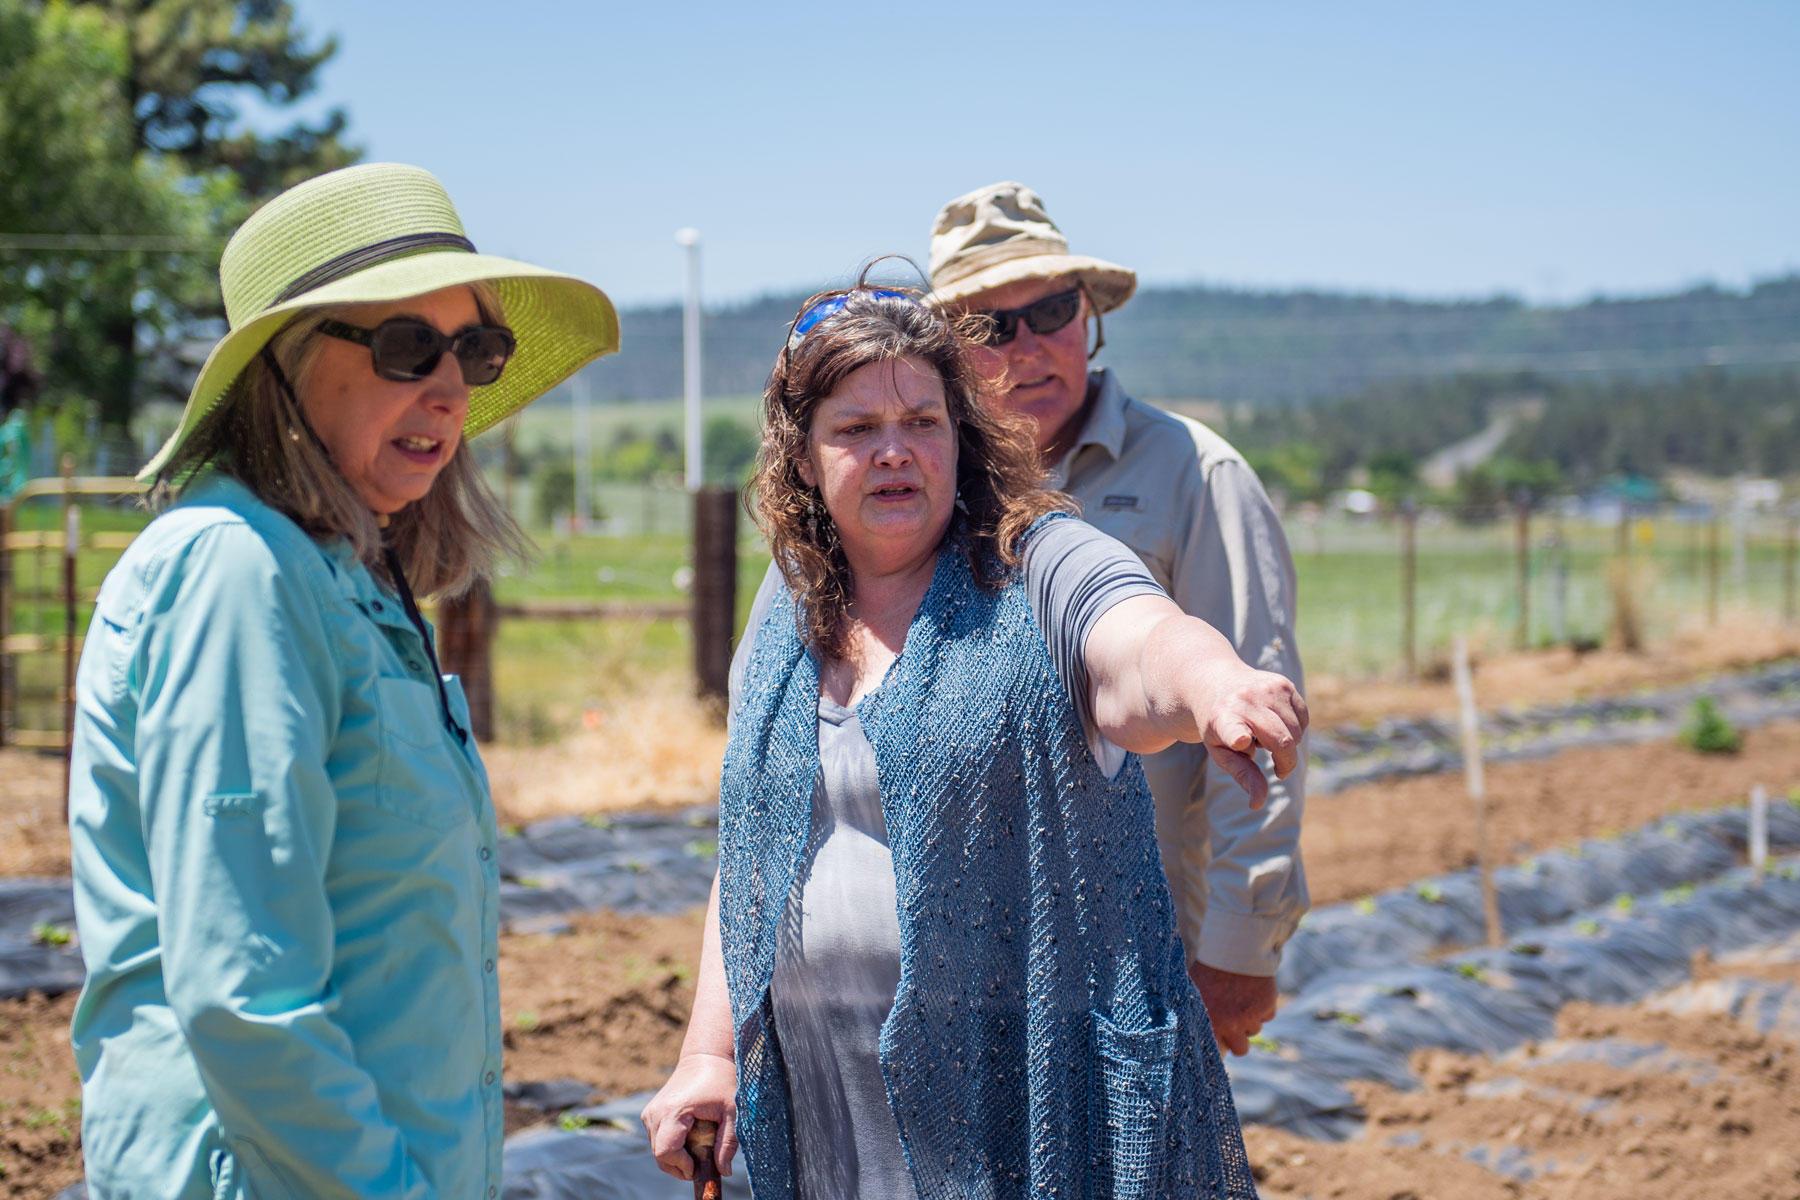 Maranath Farm is one of the farms listed on an online directory of Klamath Basin small- and medium-sized farmers and ranchers who are producing a rich diversity of agricultural products.